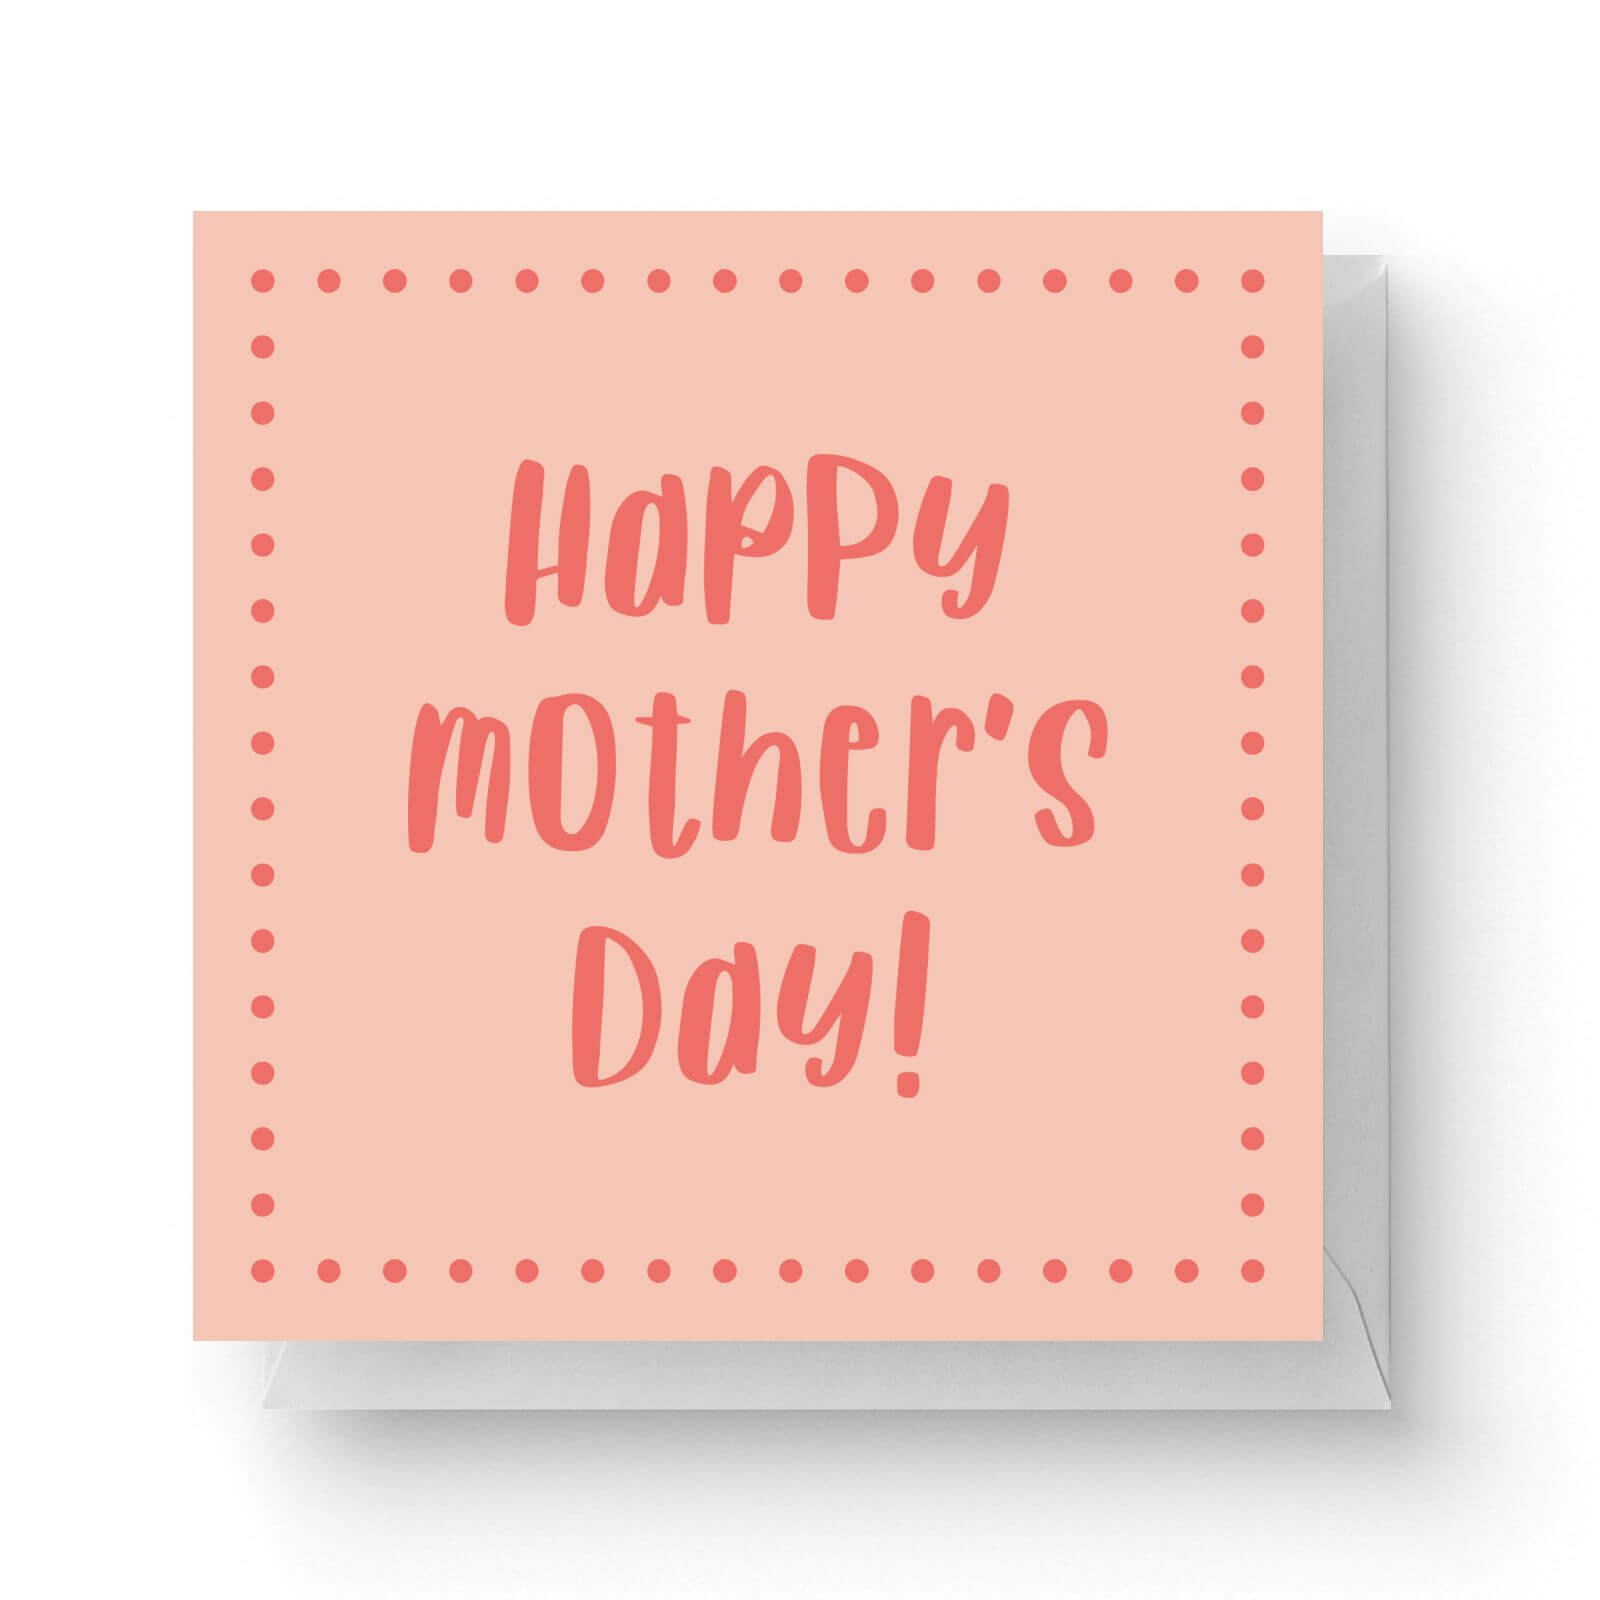 Happy Mother's Day Square Greetings Card (14.8cm x 14.8cm)